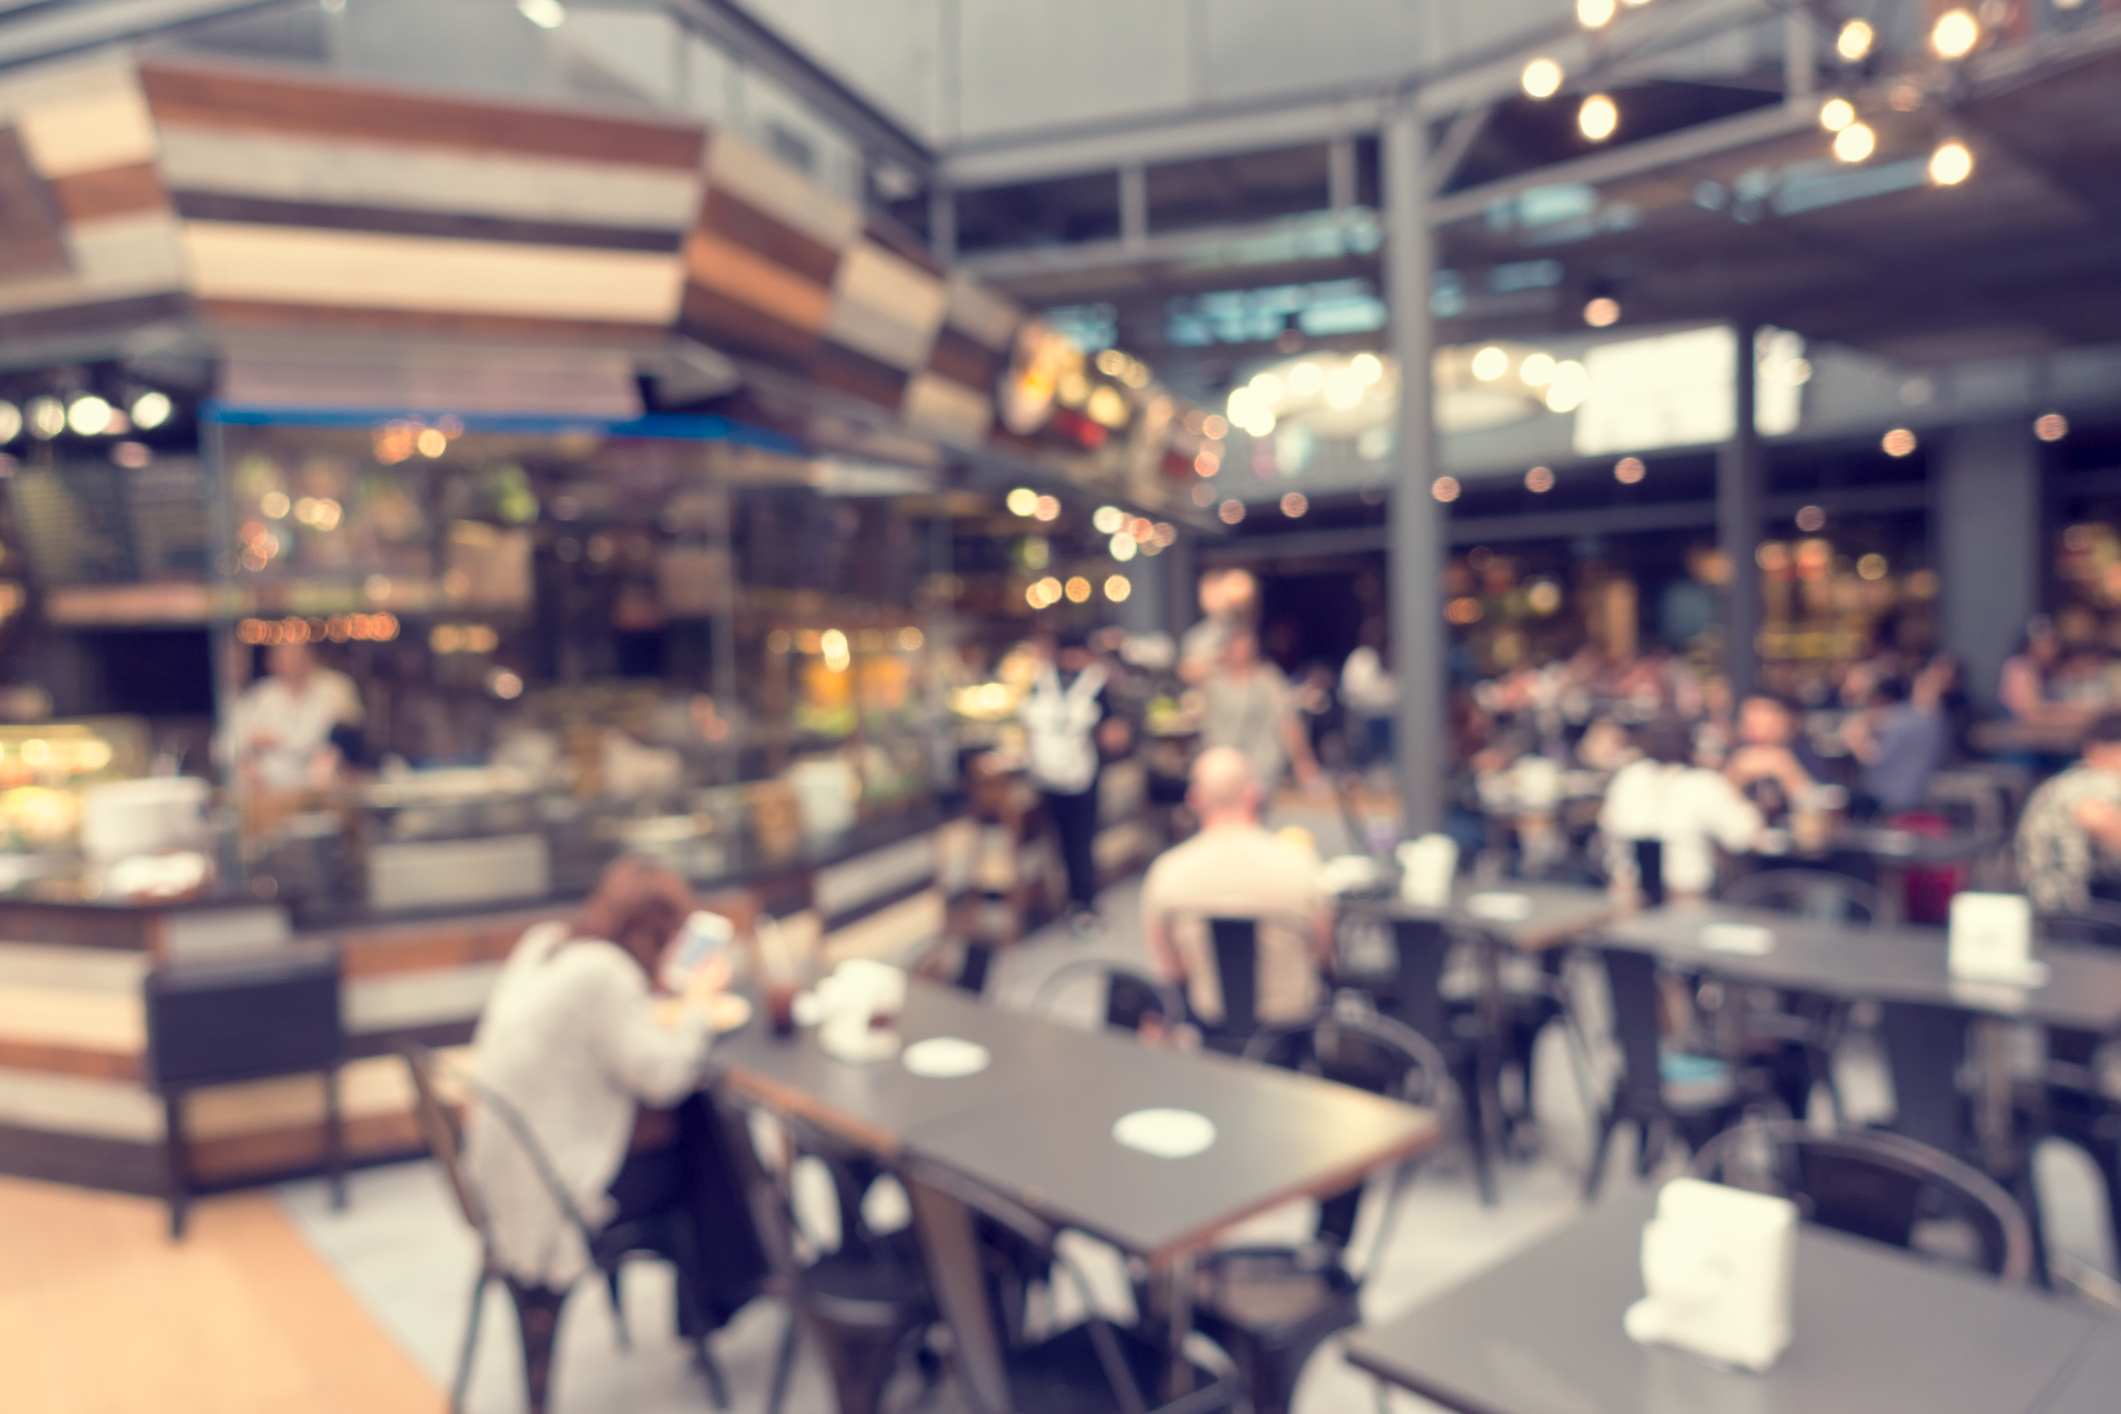 People are going to the mall to eat at the food court, not shop: UBS